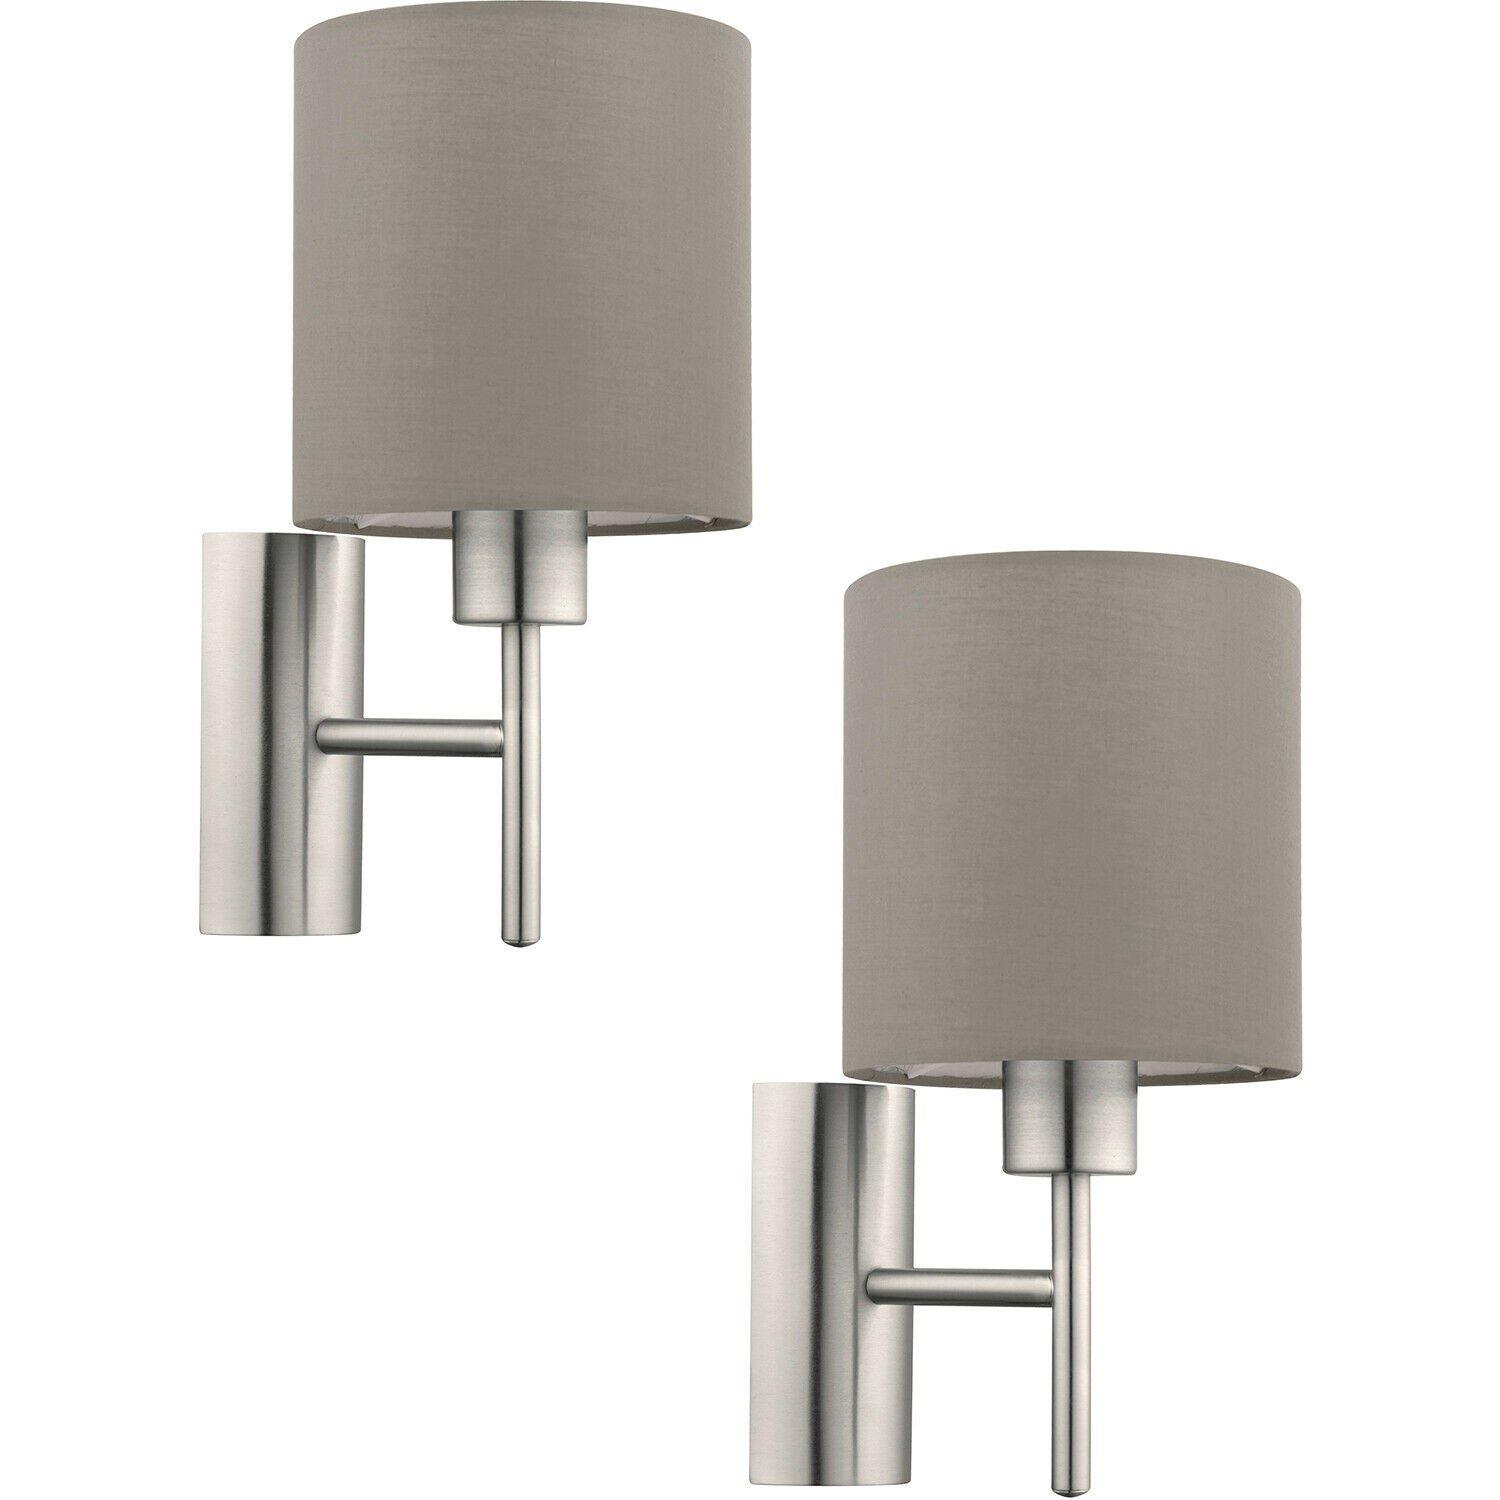 2 PACK Wall Light Colour Satin Nickel Shade Taupe Fabric Rocker Switch E27 60W